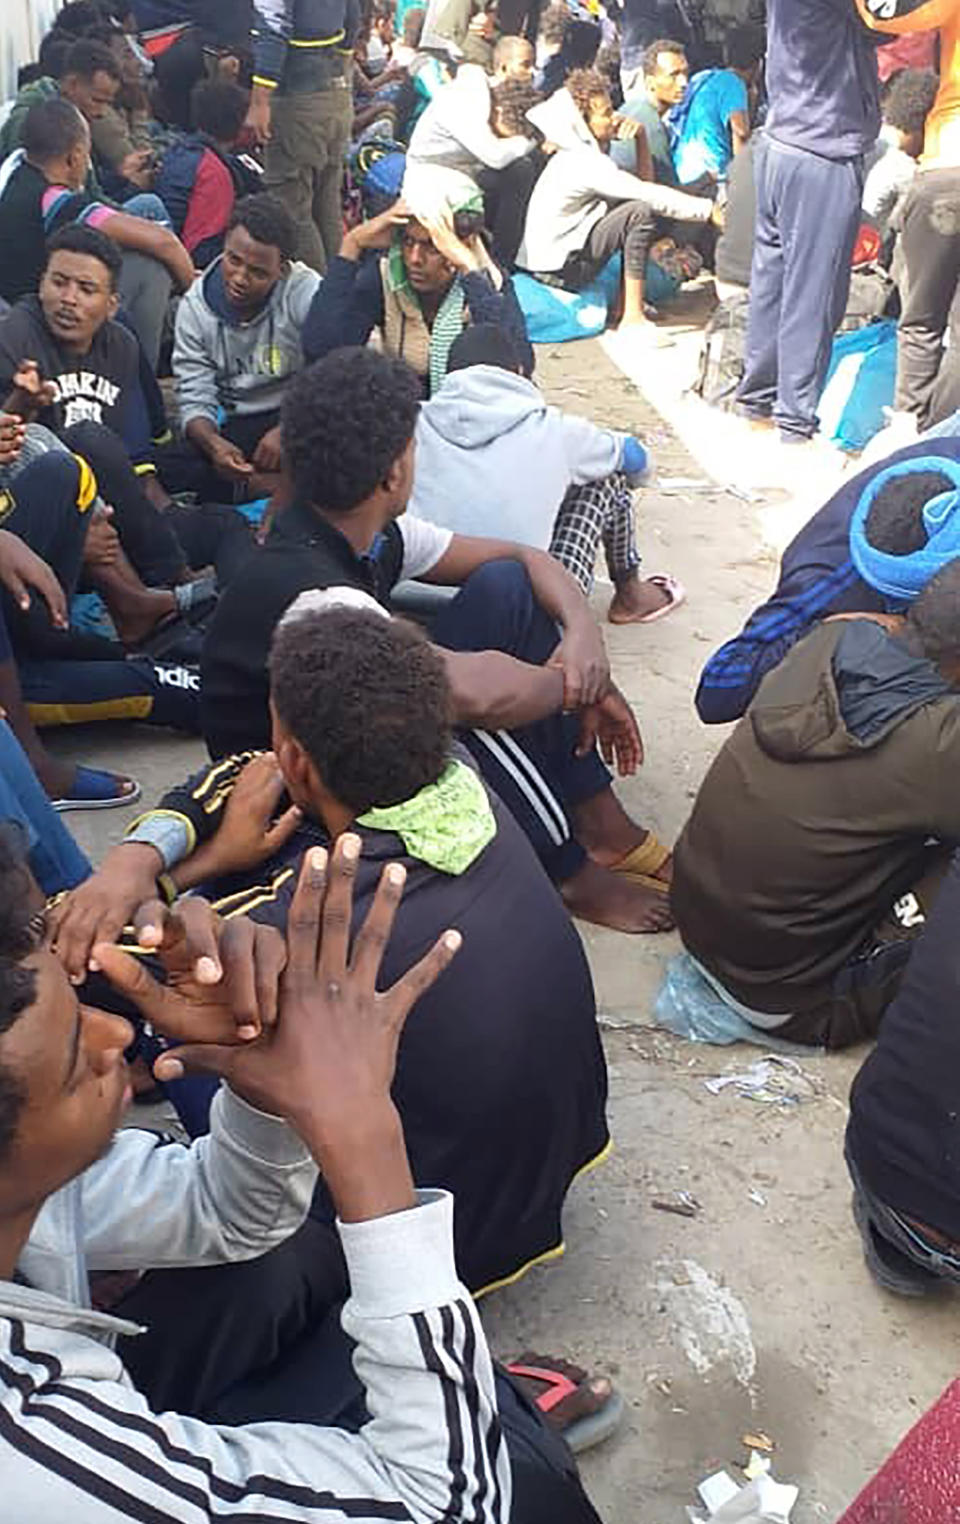 Hundreds of migrants who fled a detention center in coastal Libya crowd around a U.N. facility in Tripoli, Libya, Wednesday, Oct. 30, 2019. Around 450 people left Abu Salim detention center late Tuesday. One of the migrants, as well as activists, say they were forced to beg for money from families to pay police to buy them food. Those who couldn't pay went hungry. (AP Photo)